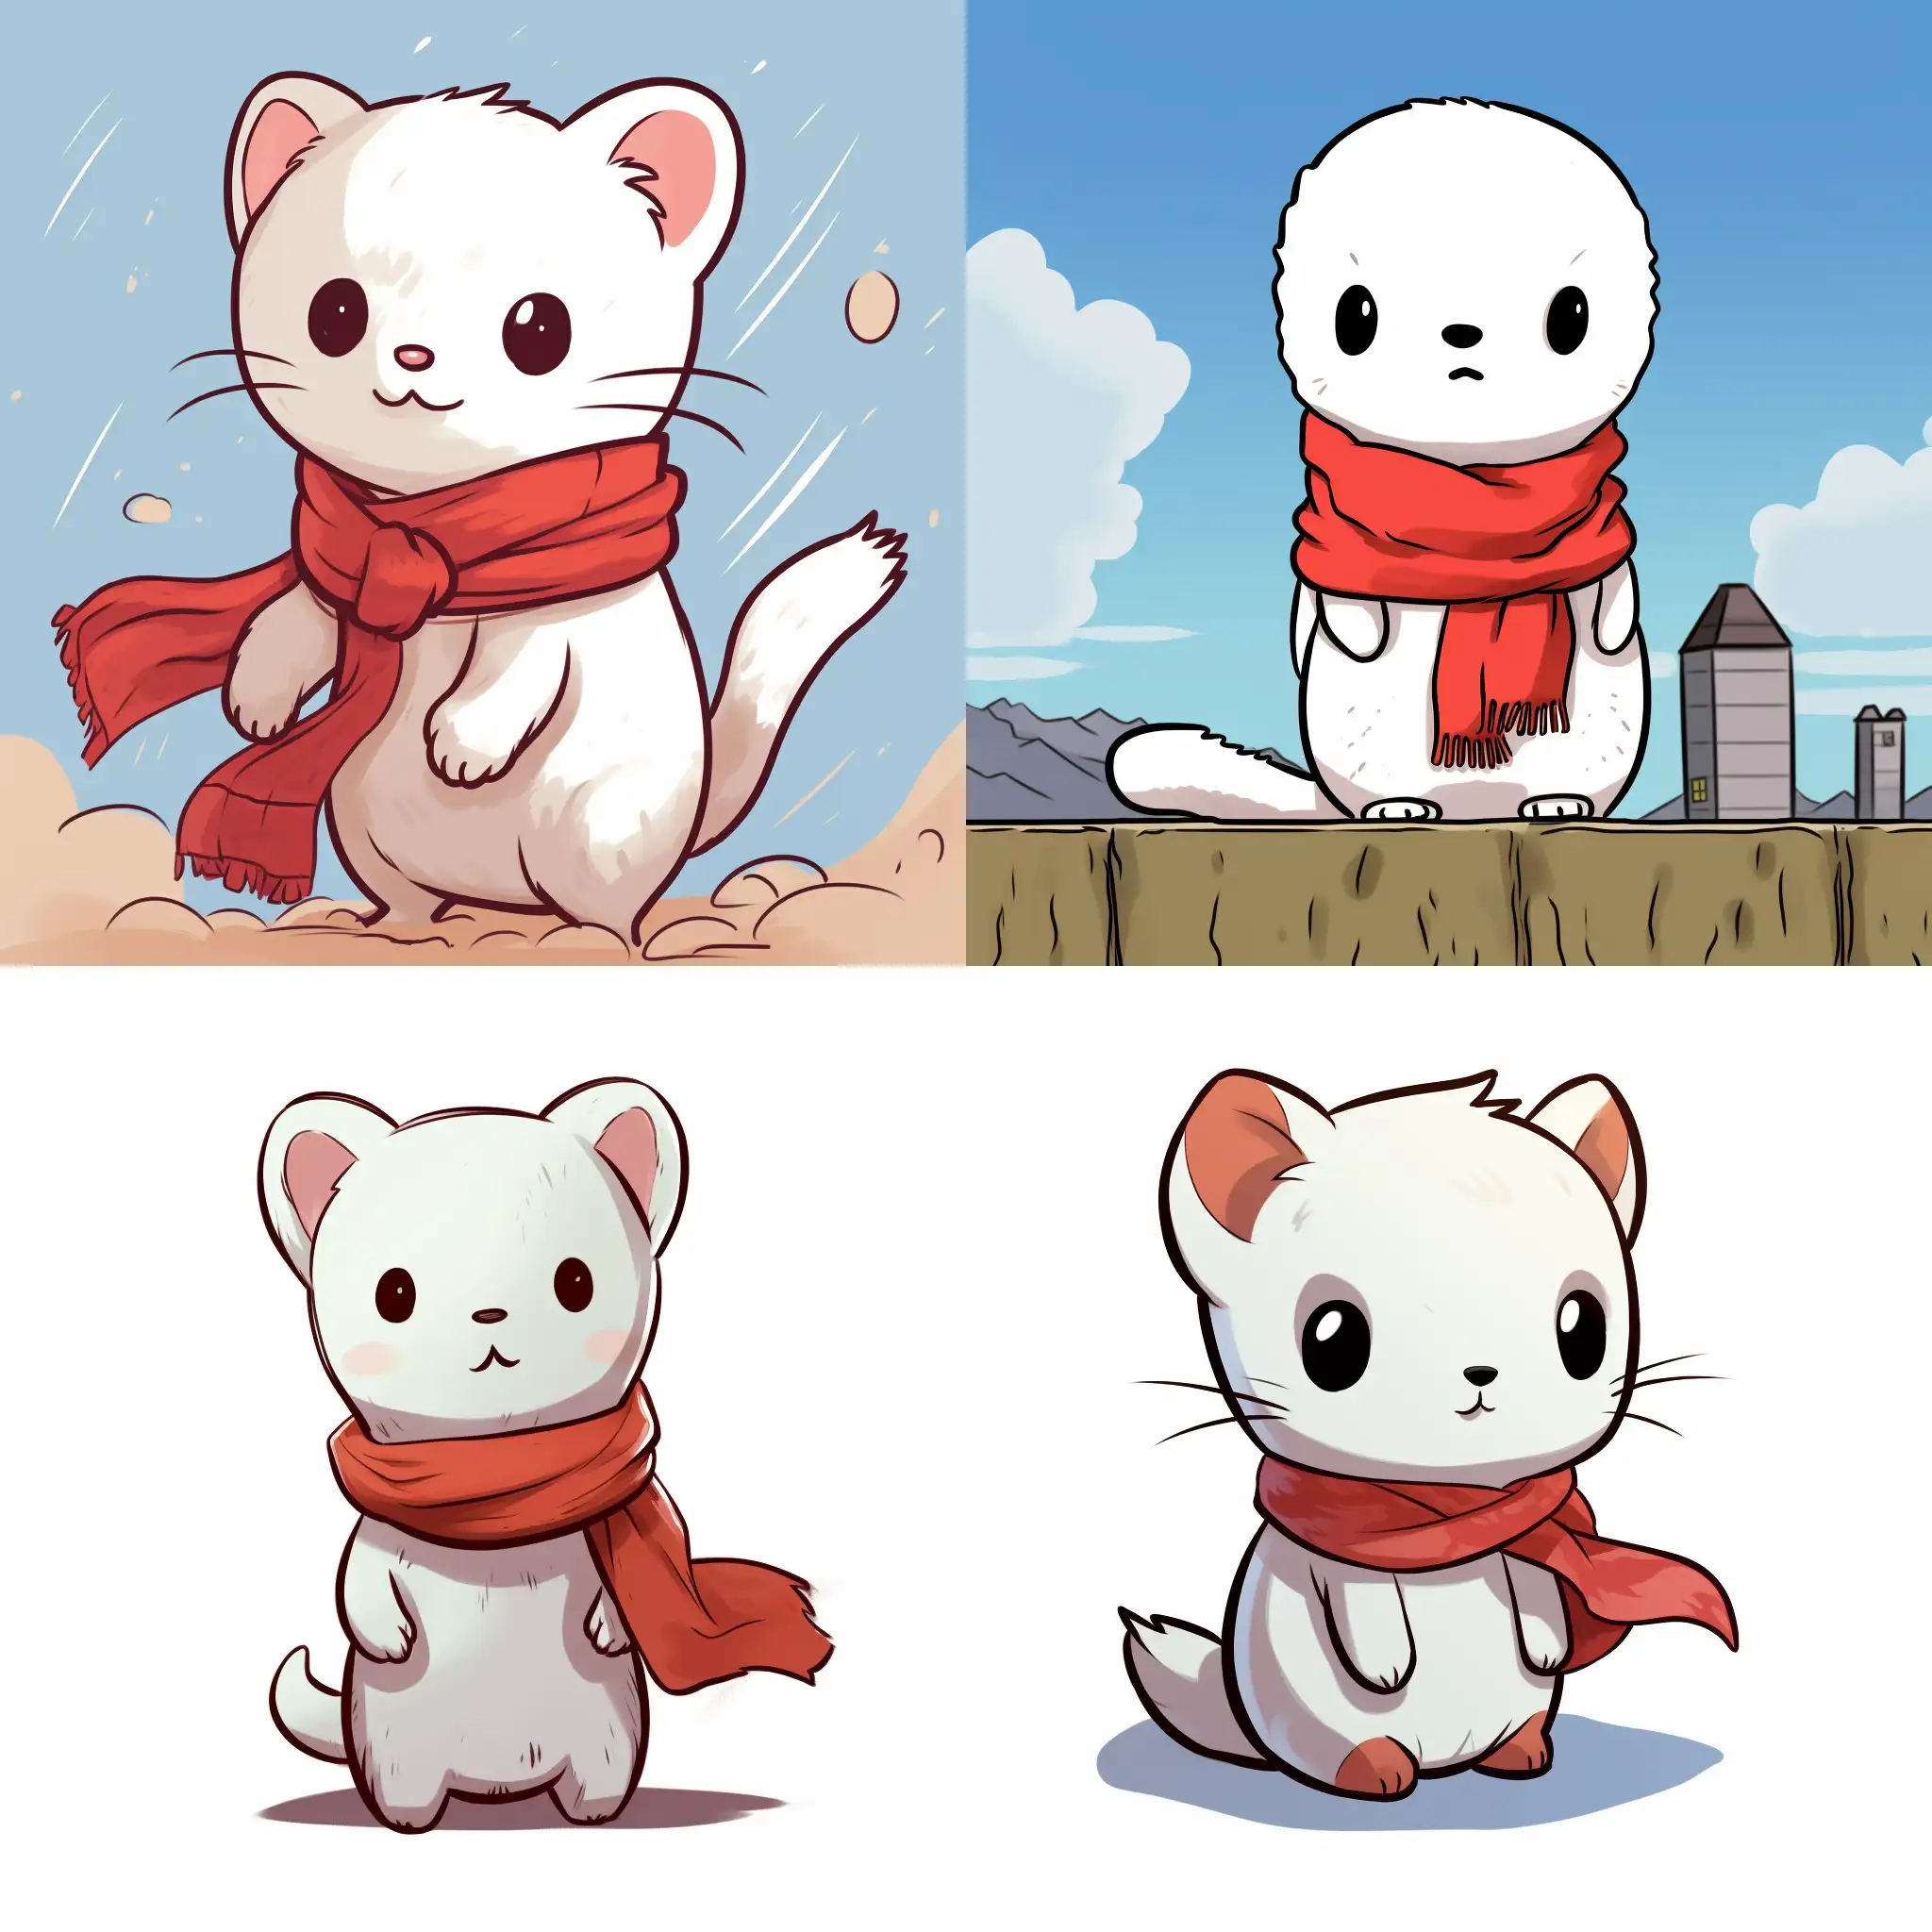 Adorable-Chibi-White-Stoat-with-Red-Scarf-in-Jeff-Lemire-and-Peter-Bagg-Manga-Style